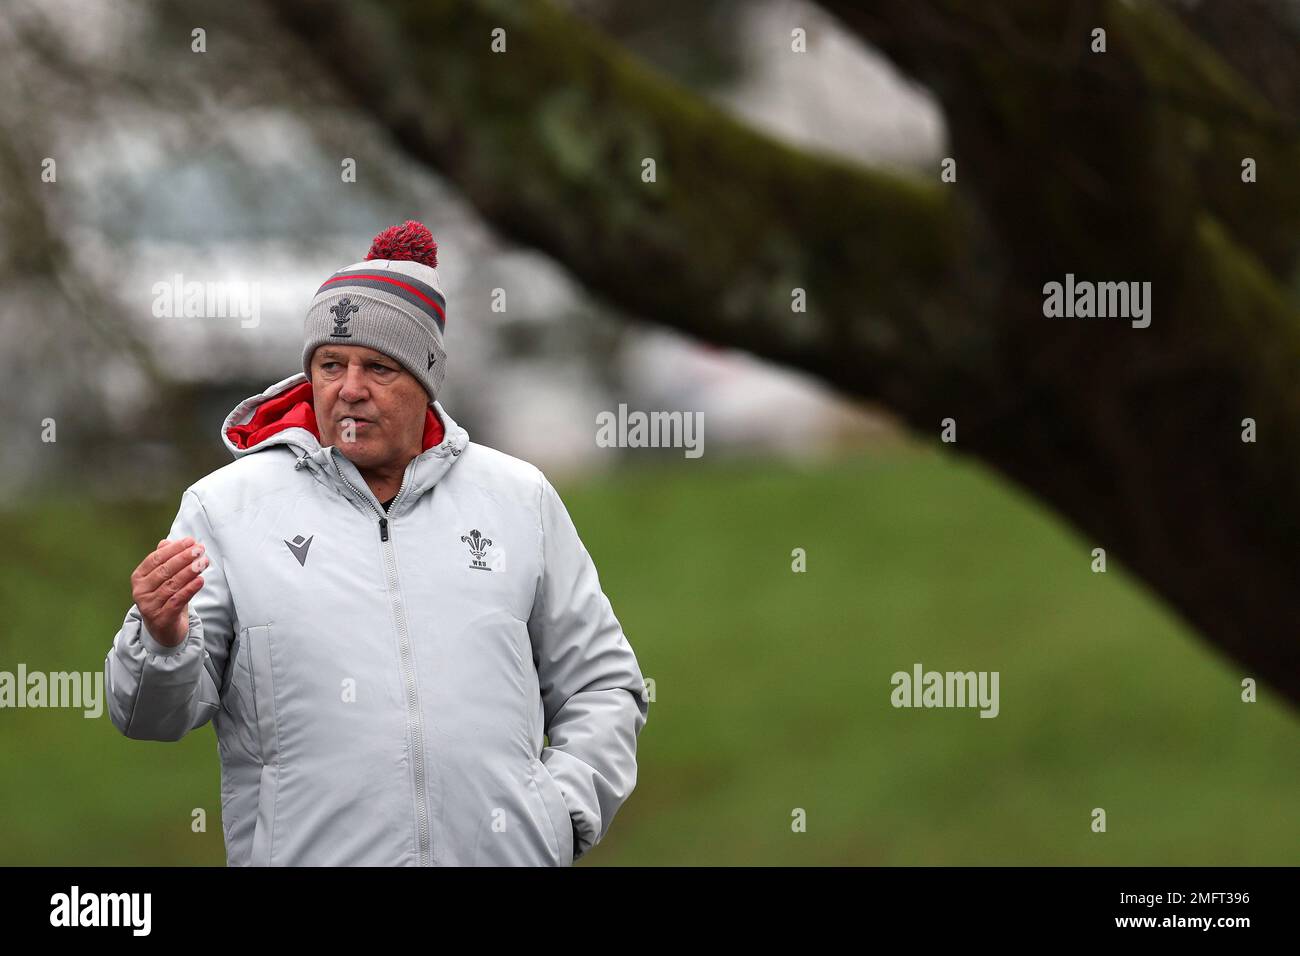 Cardiff, UK. 25th Jan, 2023. Warren Gatland, the head coach of Wales rugby team arrives at the Wales rugby training session, Vale of Glamorgan on Wednesday 25th January 2023. The team are preparing for this years Guinness Six nations championship . pic by Andrew Orchard/Andrew Orchard sports photography/ Alamy Live News Credit: Andrew Orchard sports photography/Alamy Live News Stock Photo